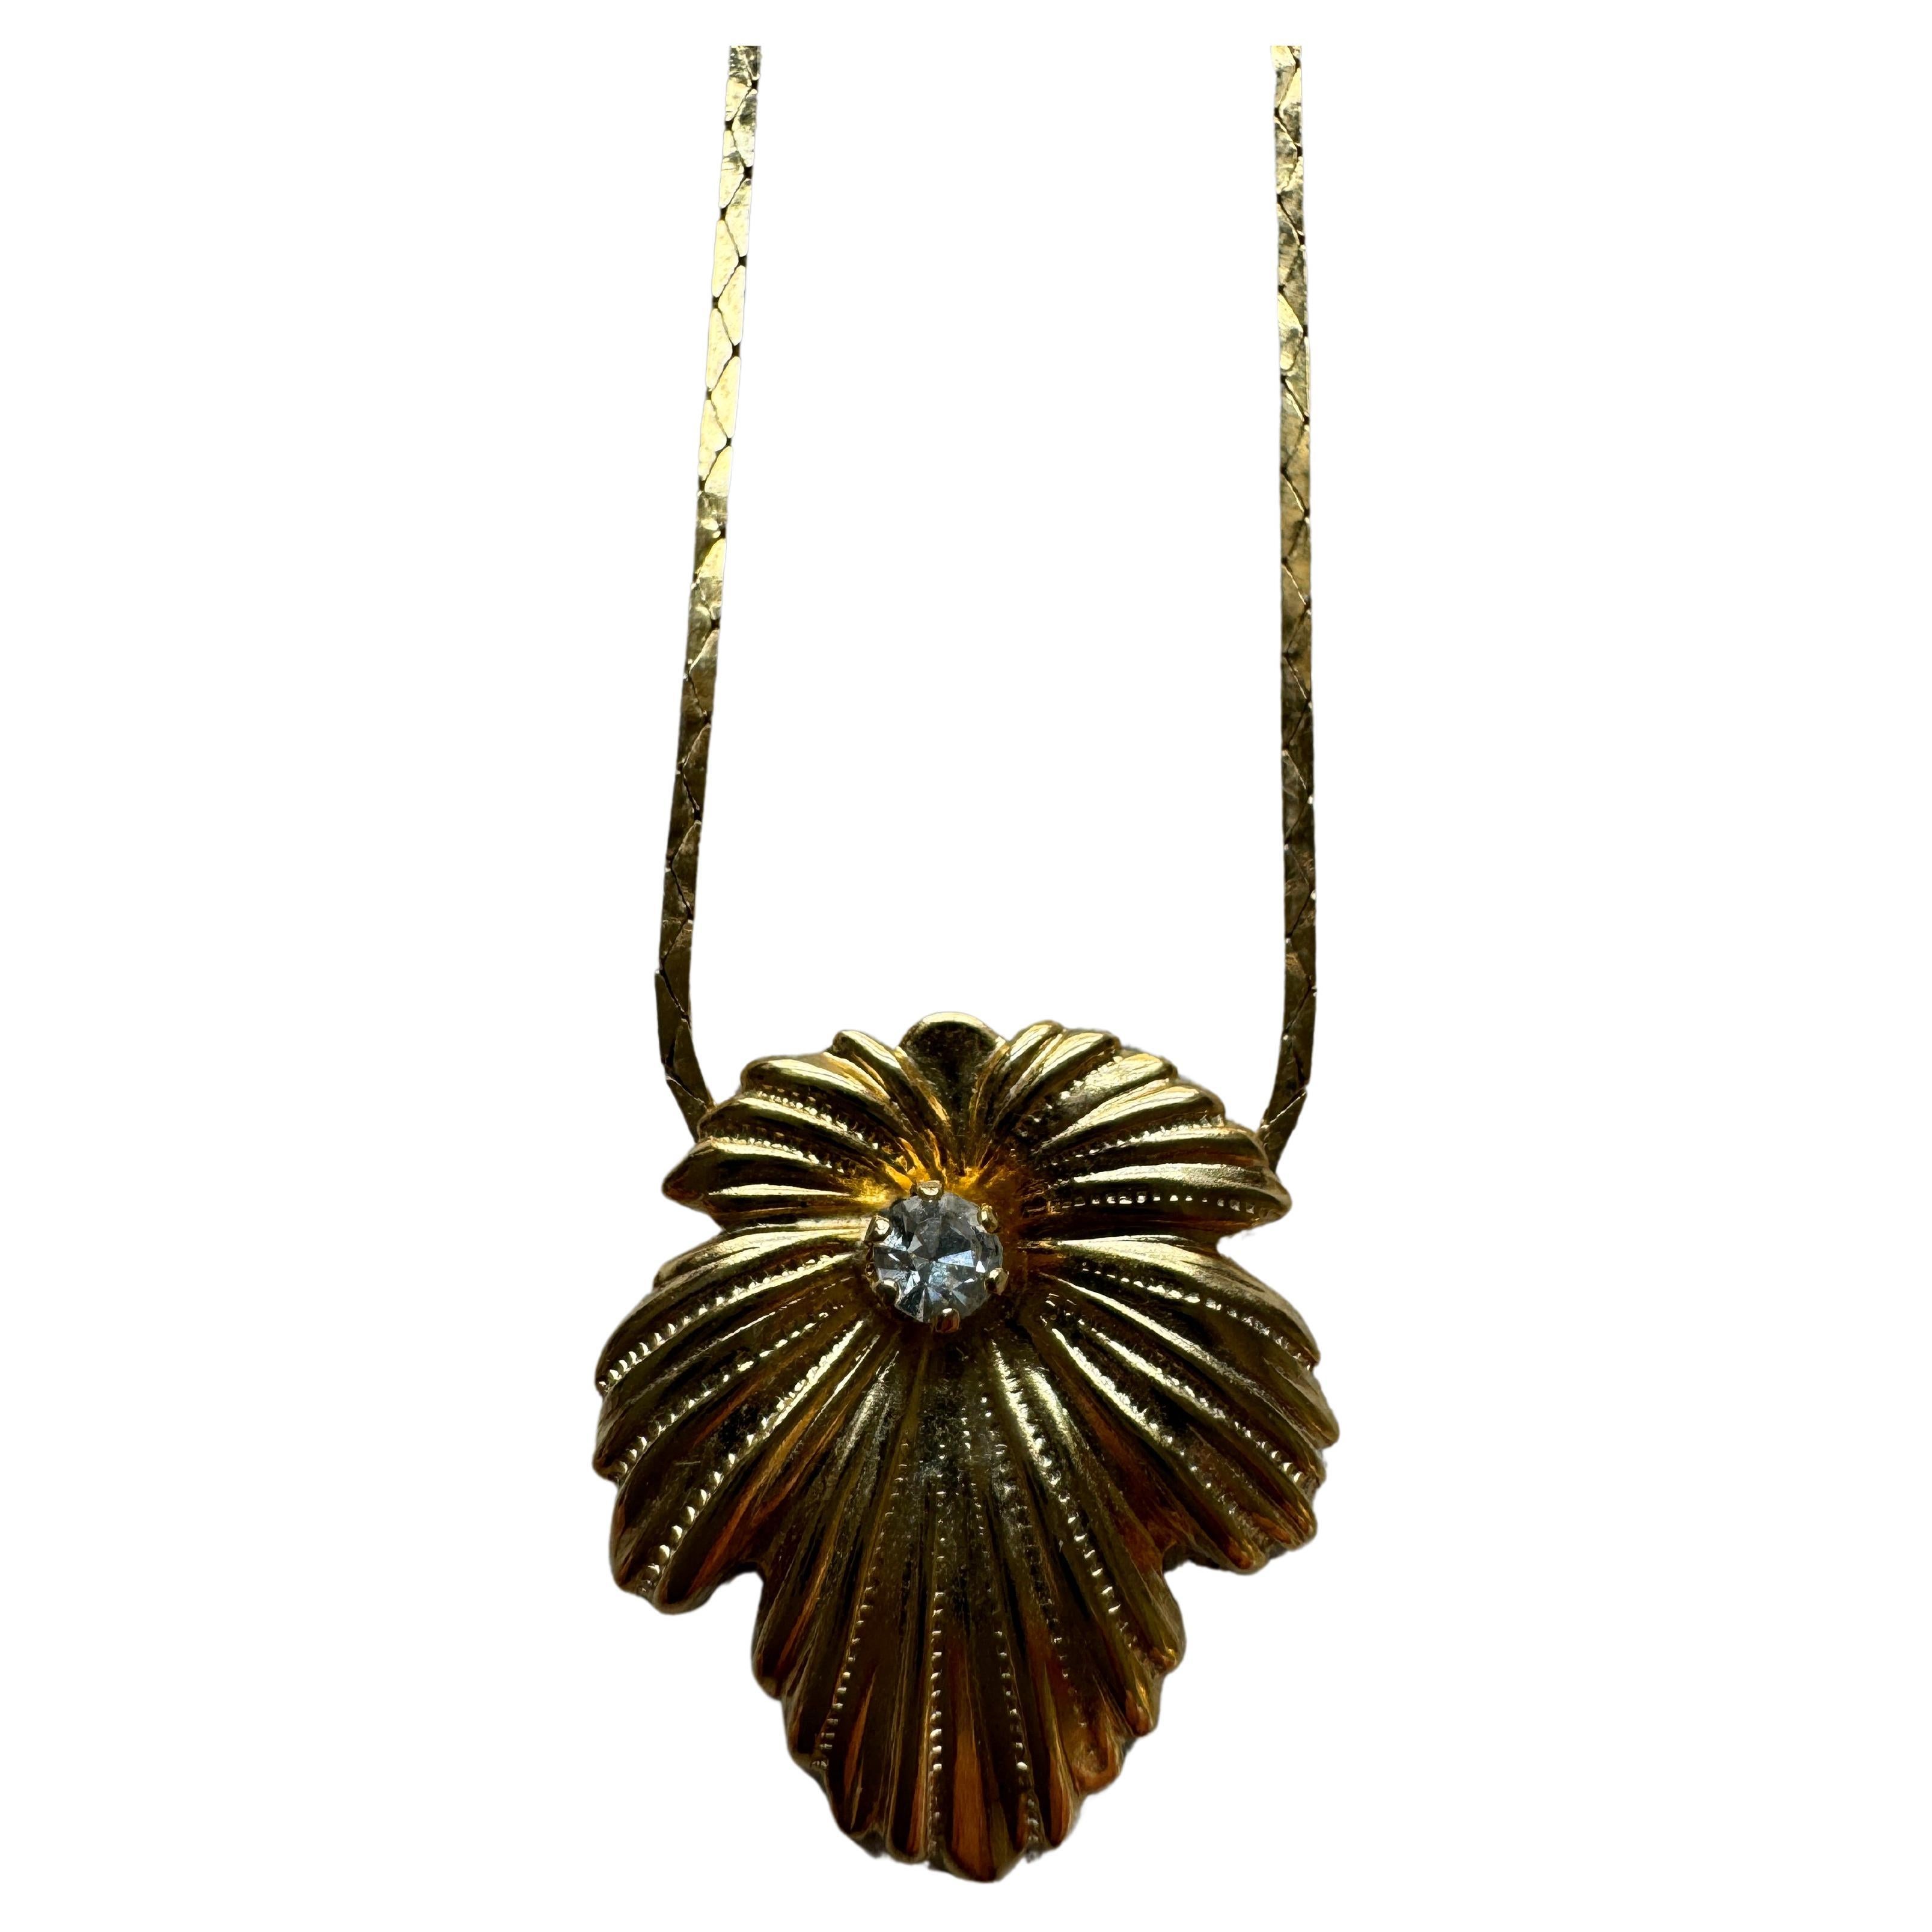 16" Vintage Gold Plated Palm Leaf Necklace With White Topaz Stone For Sale